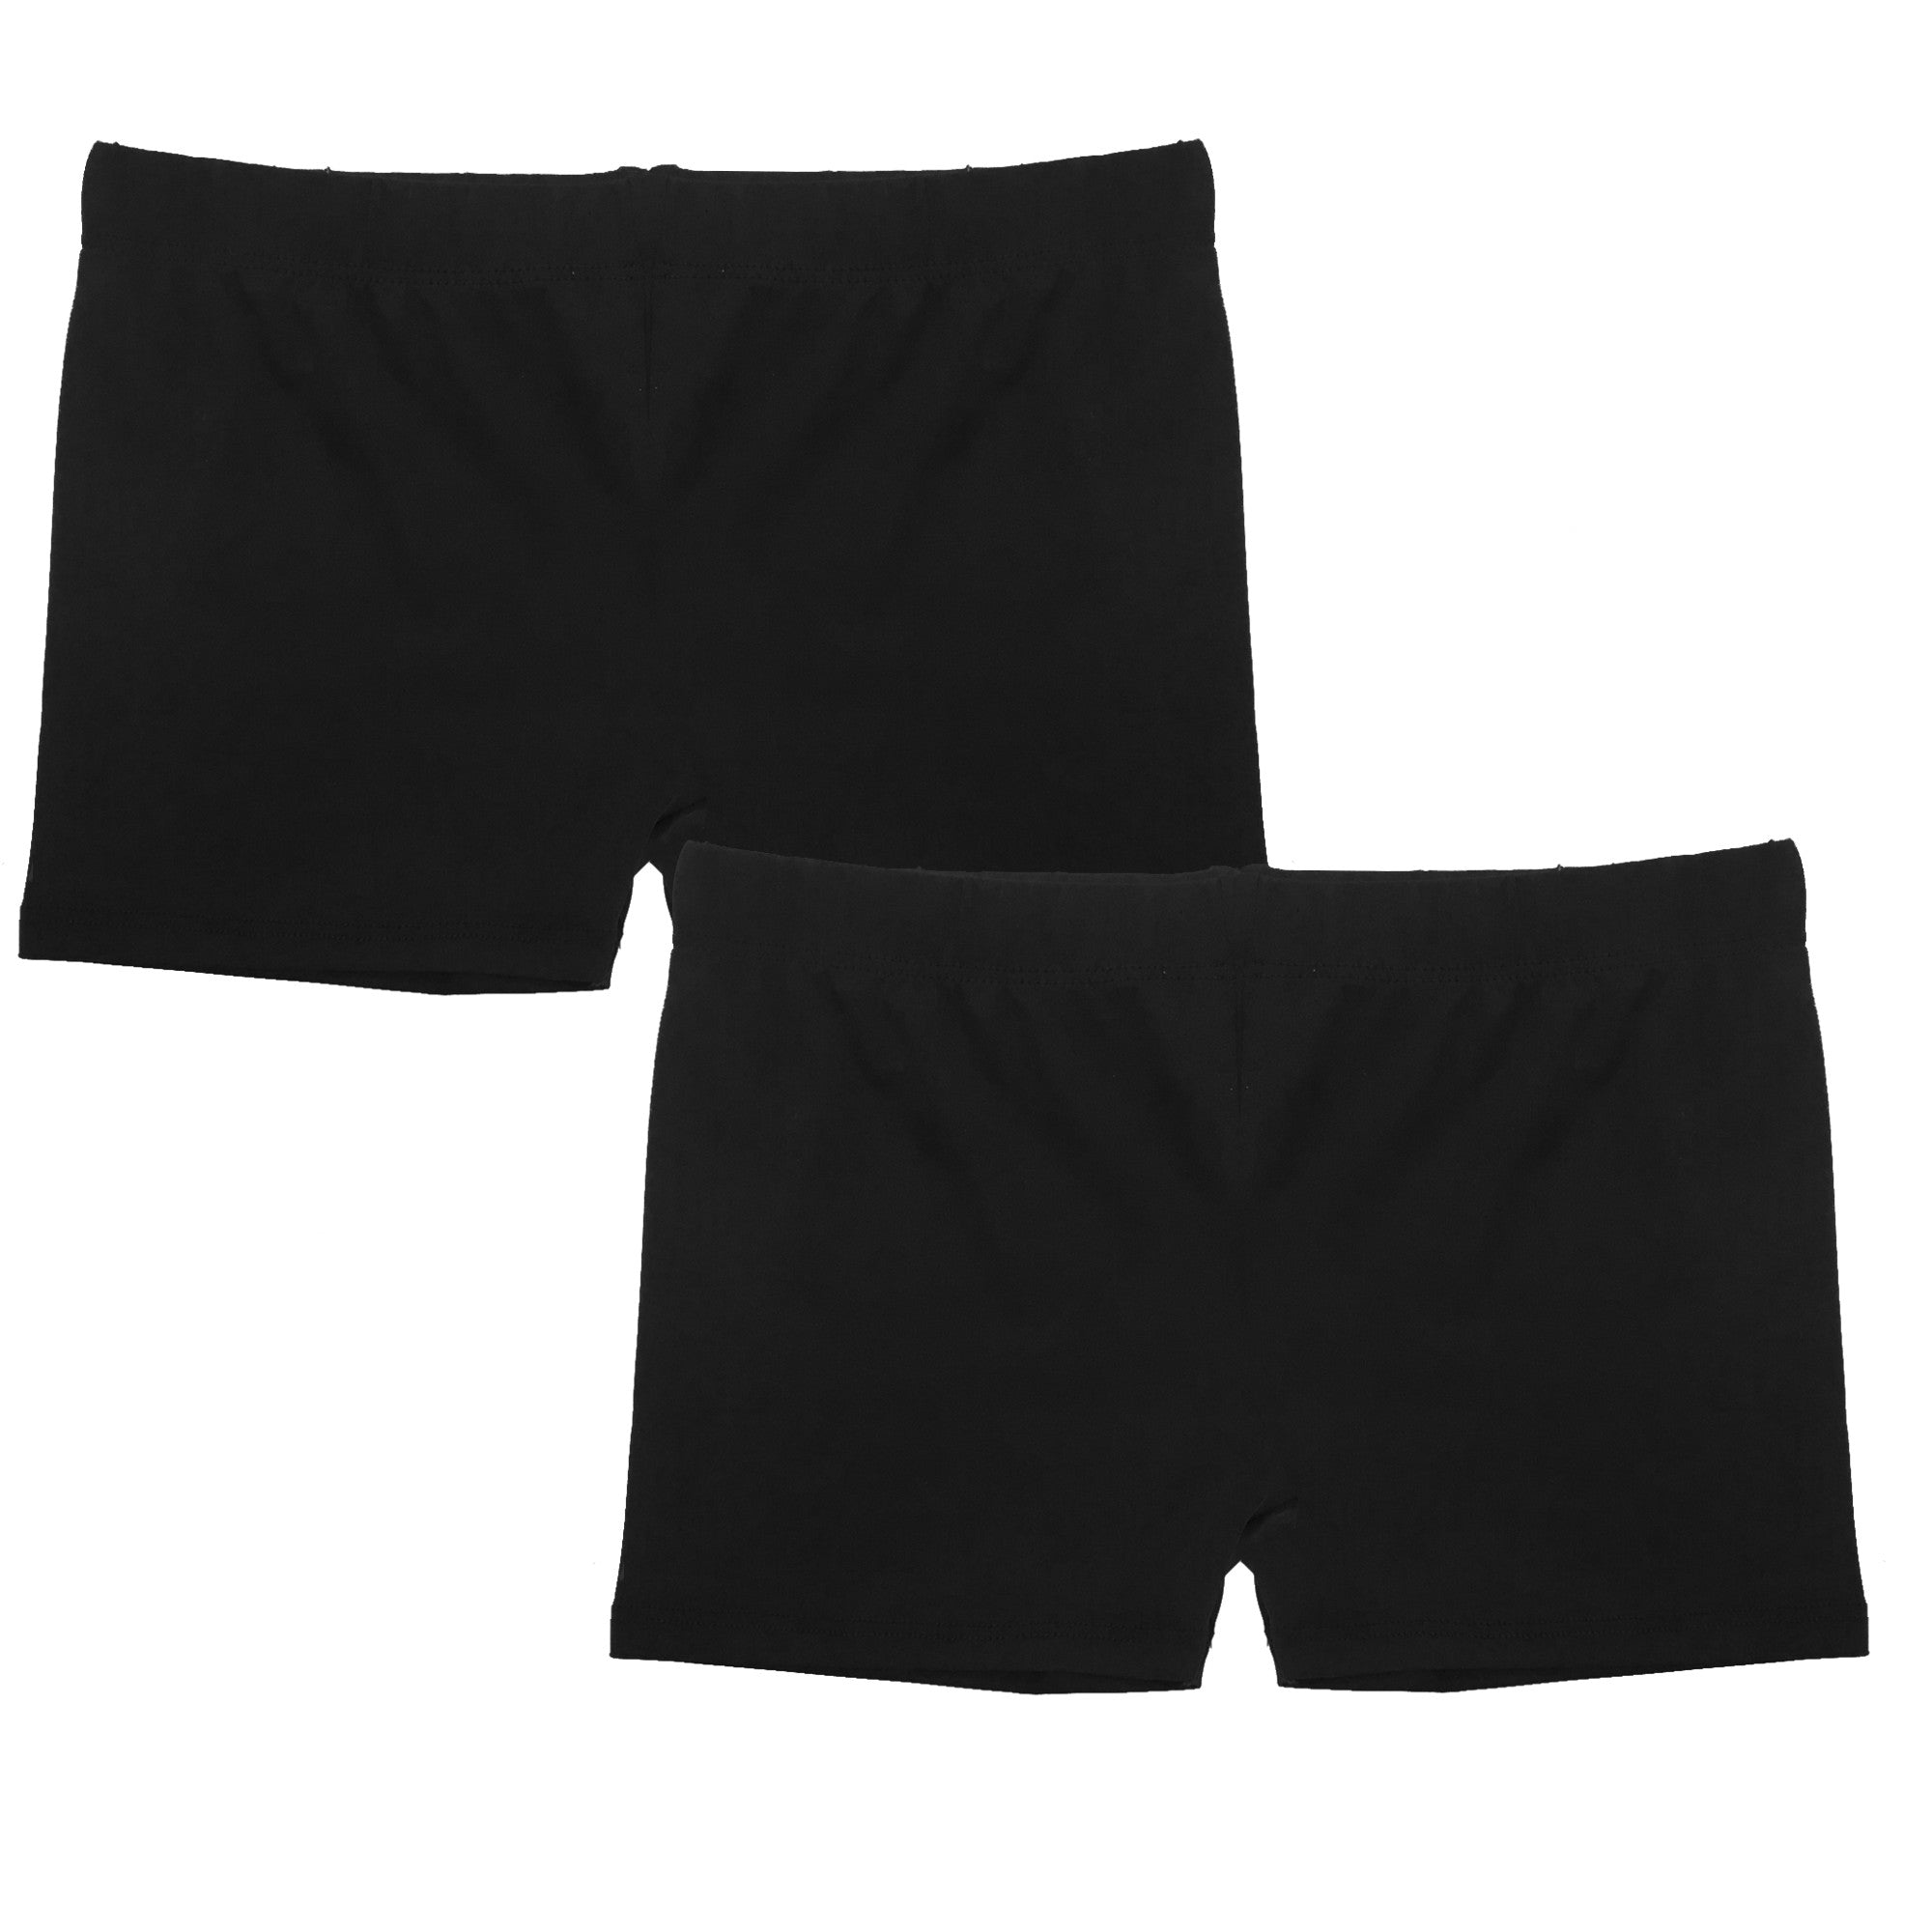 Popular Girl's Playground Under Dress Shorts - 2 pack – The Popular Store